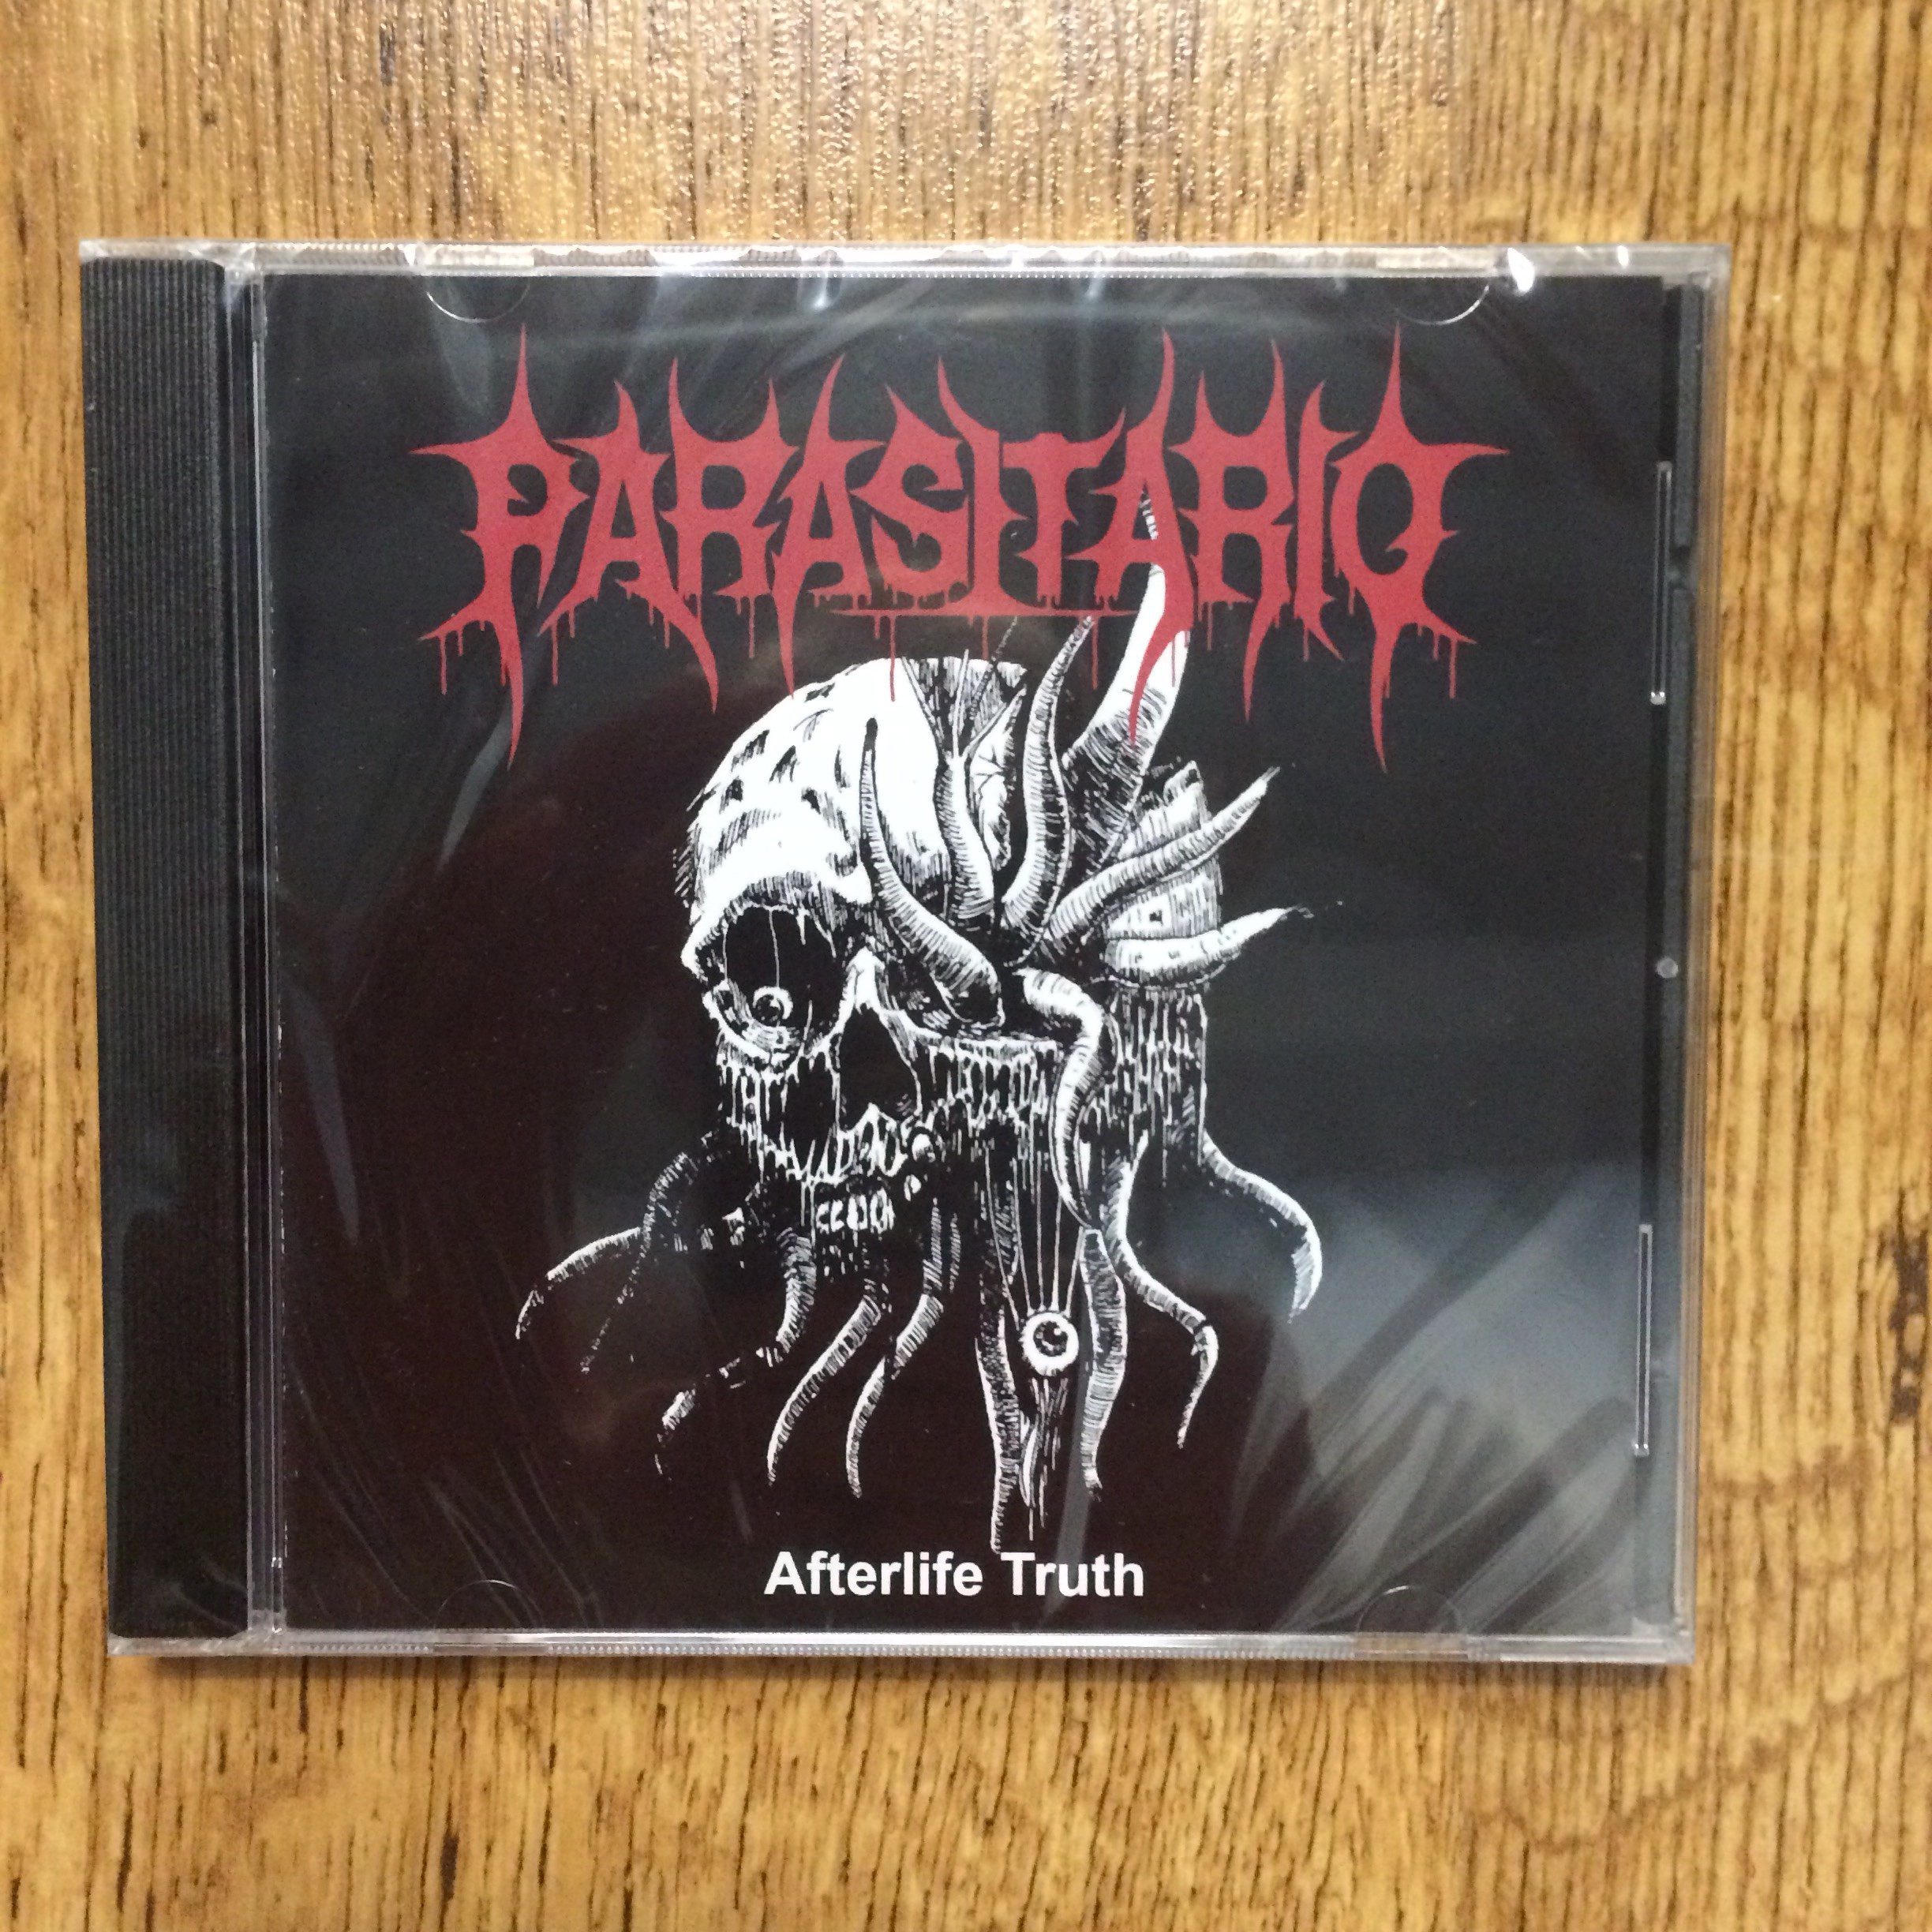 Photo of the Parasitario - "Afterlife Truth" CD